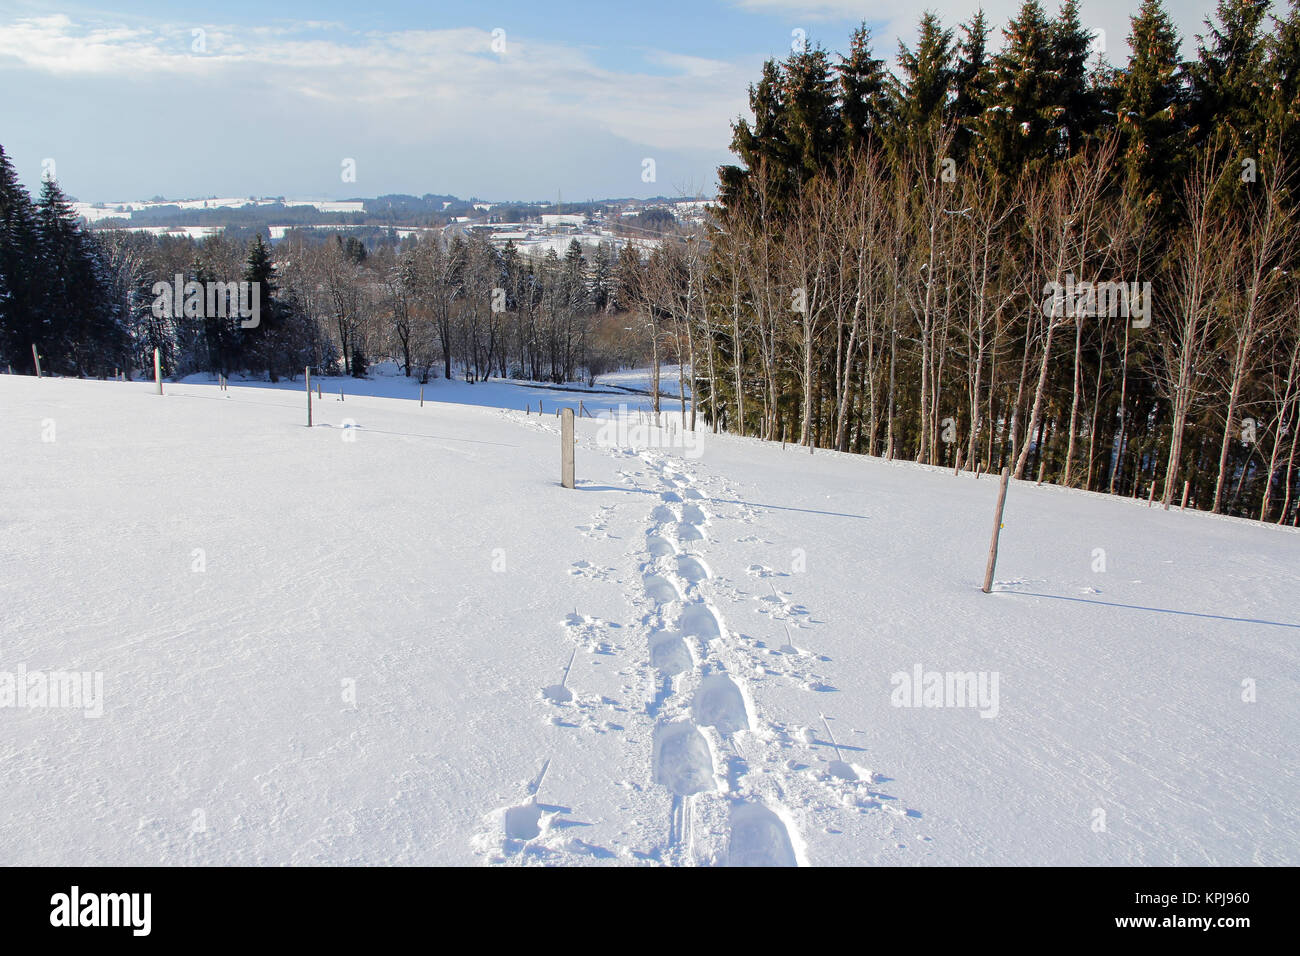 snowshoe tracks in the snowy landscape. winter sports in bavaria Stock Photo